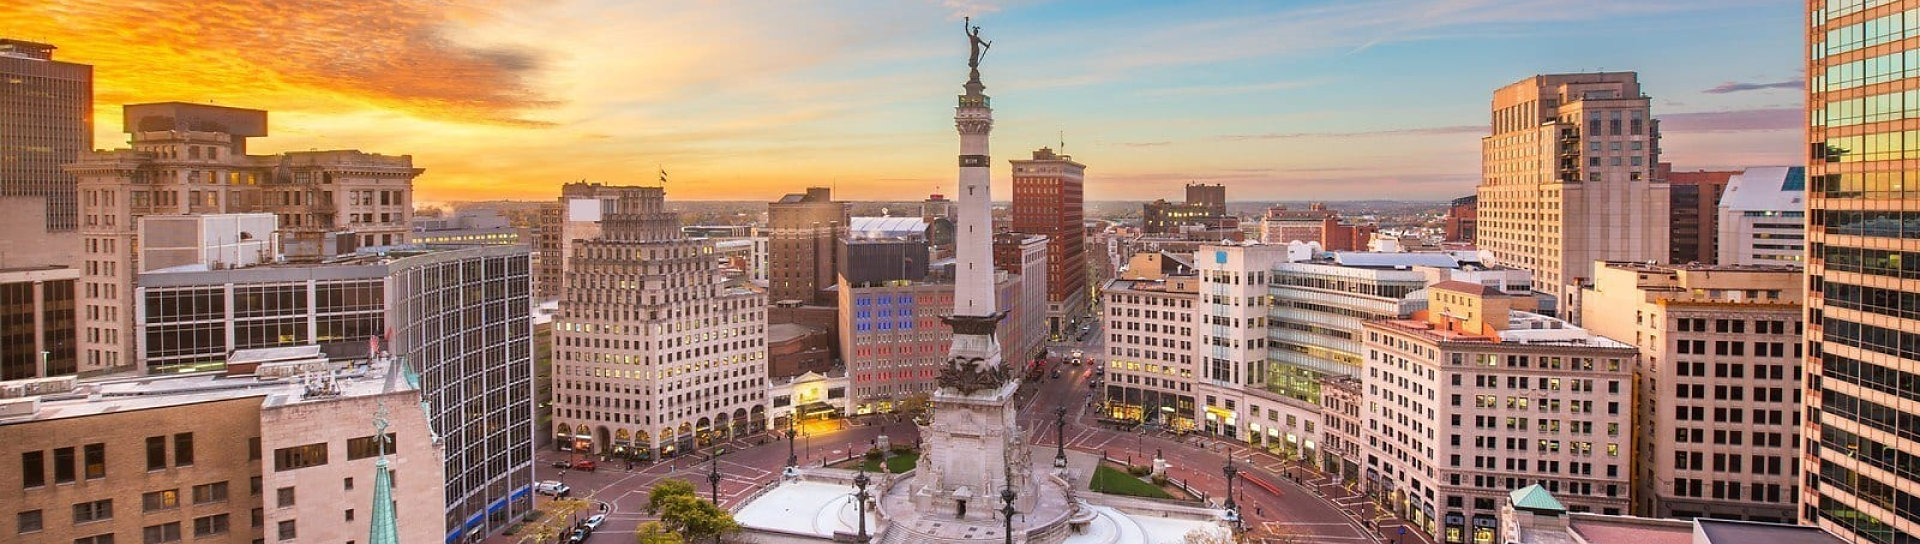 Panoramic view of the city of Columbus